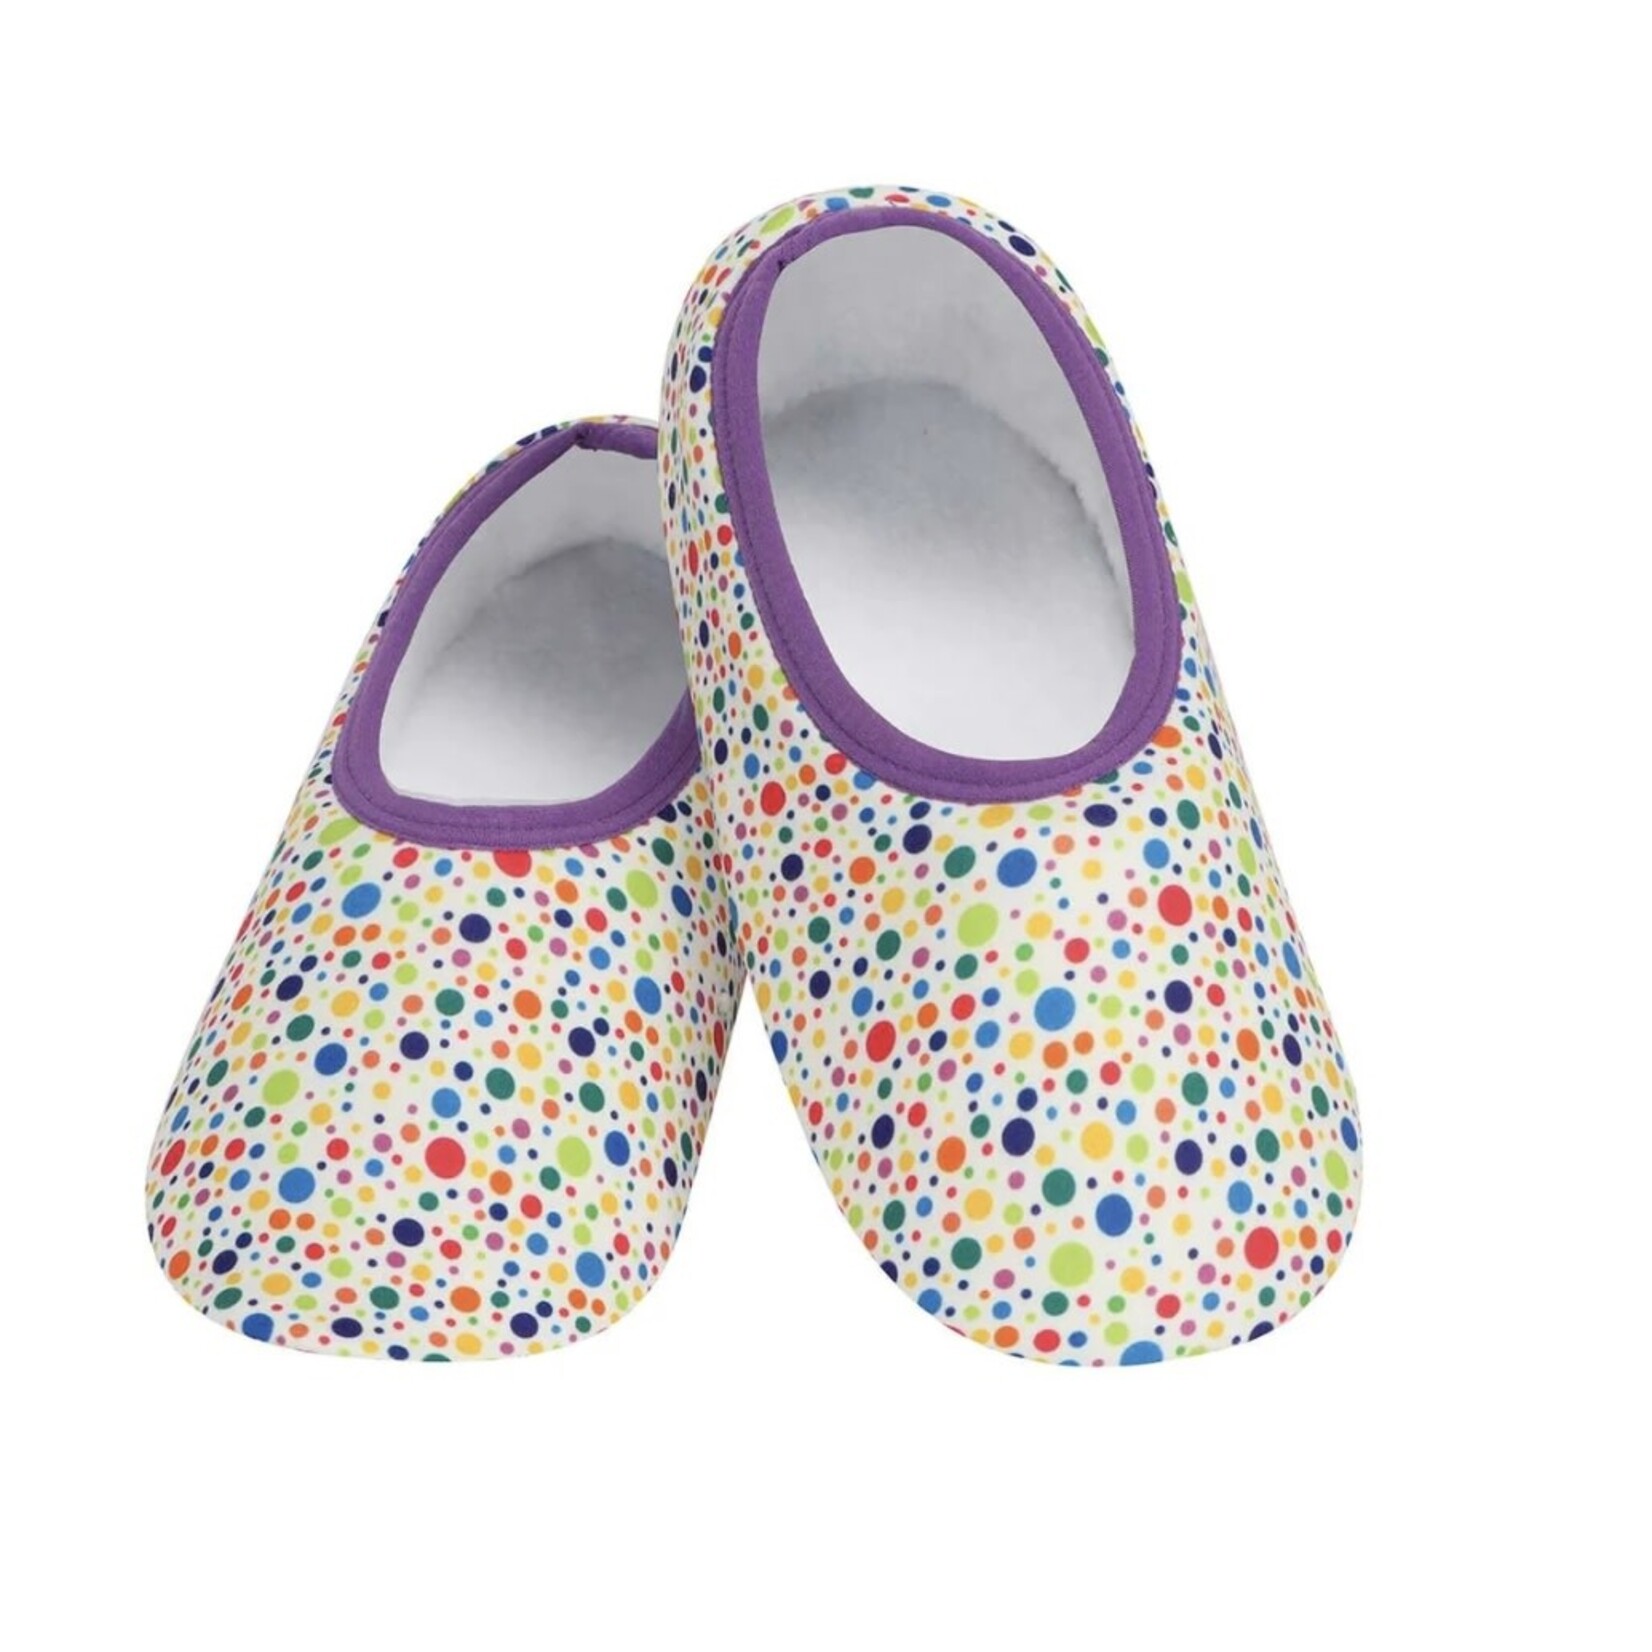 Snoozies Snoozies Multi Dots Skinnies Slippers